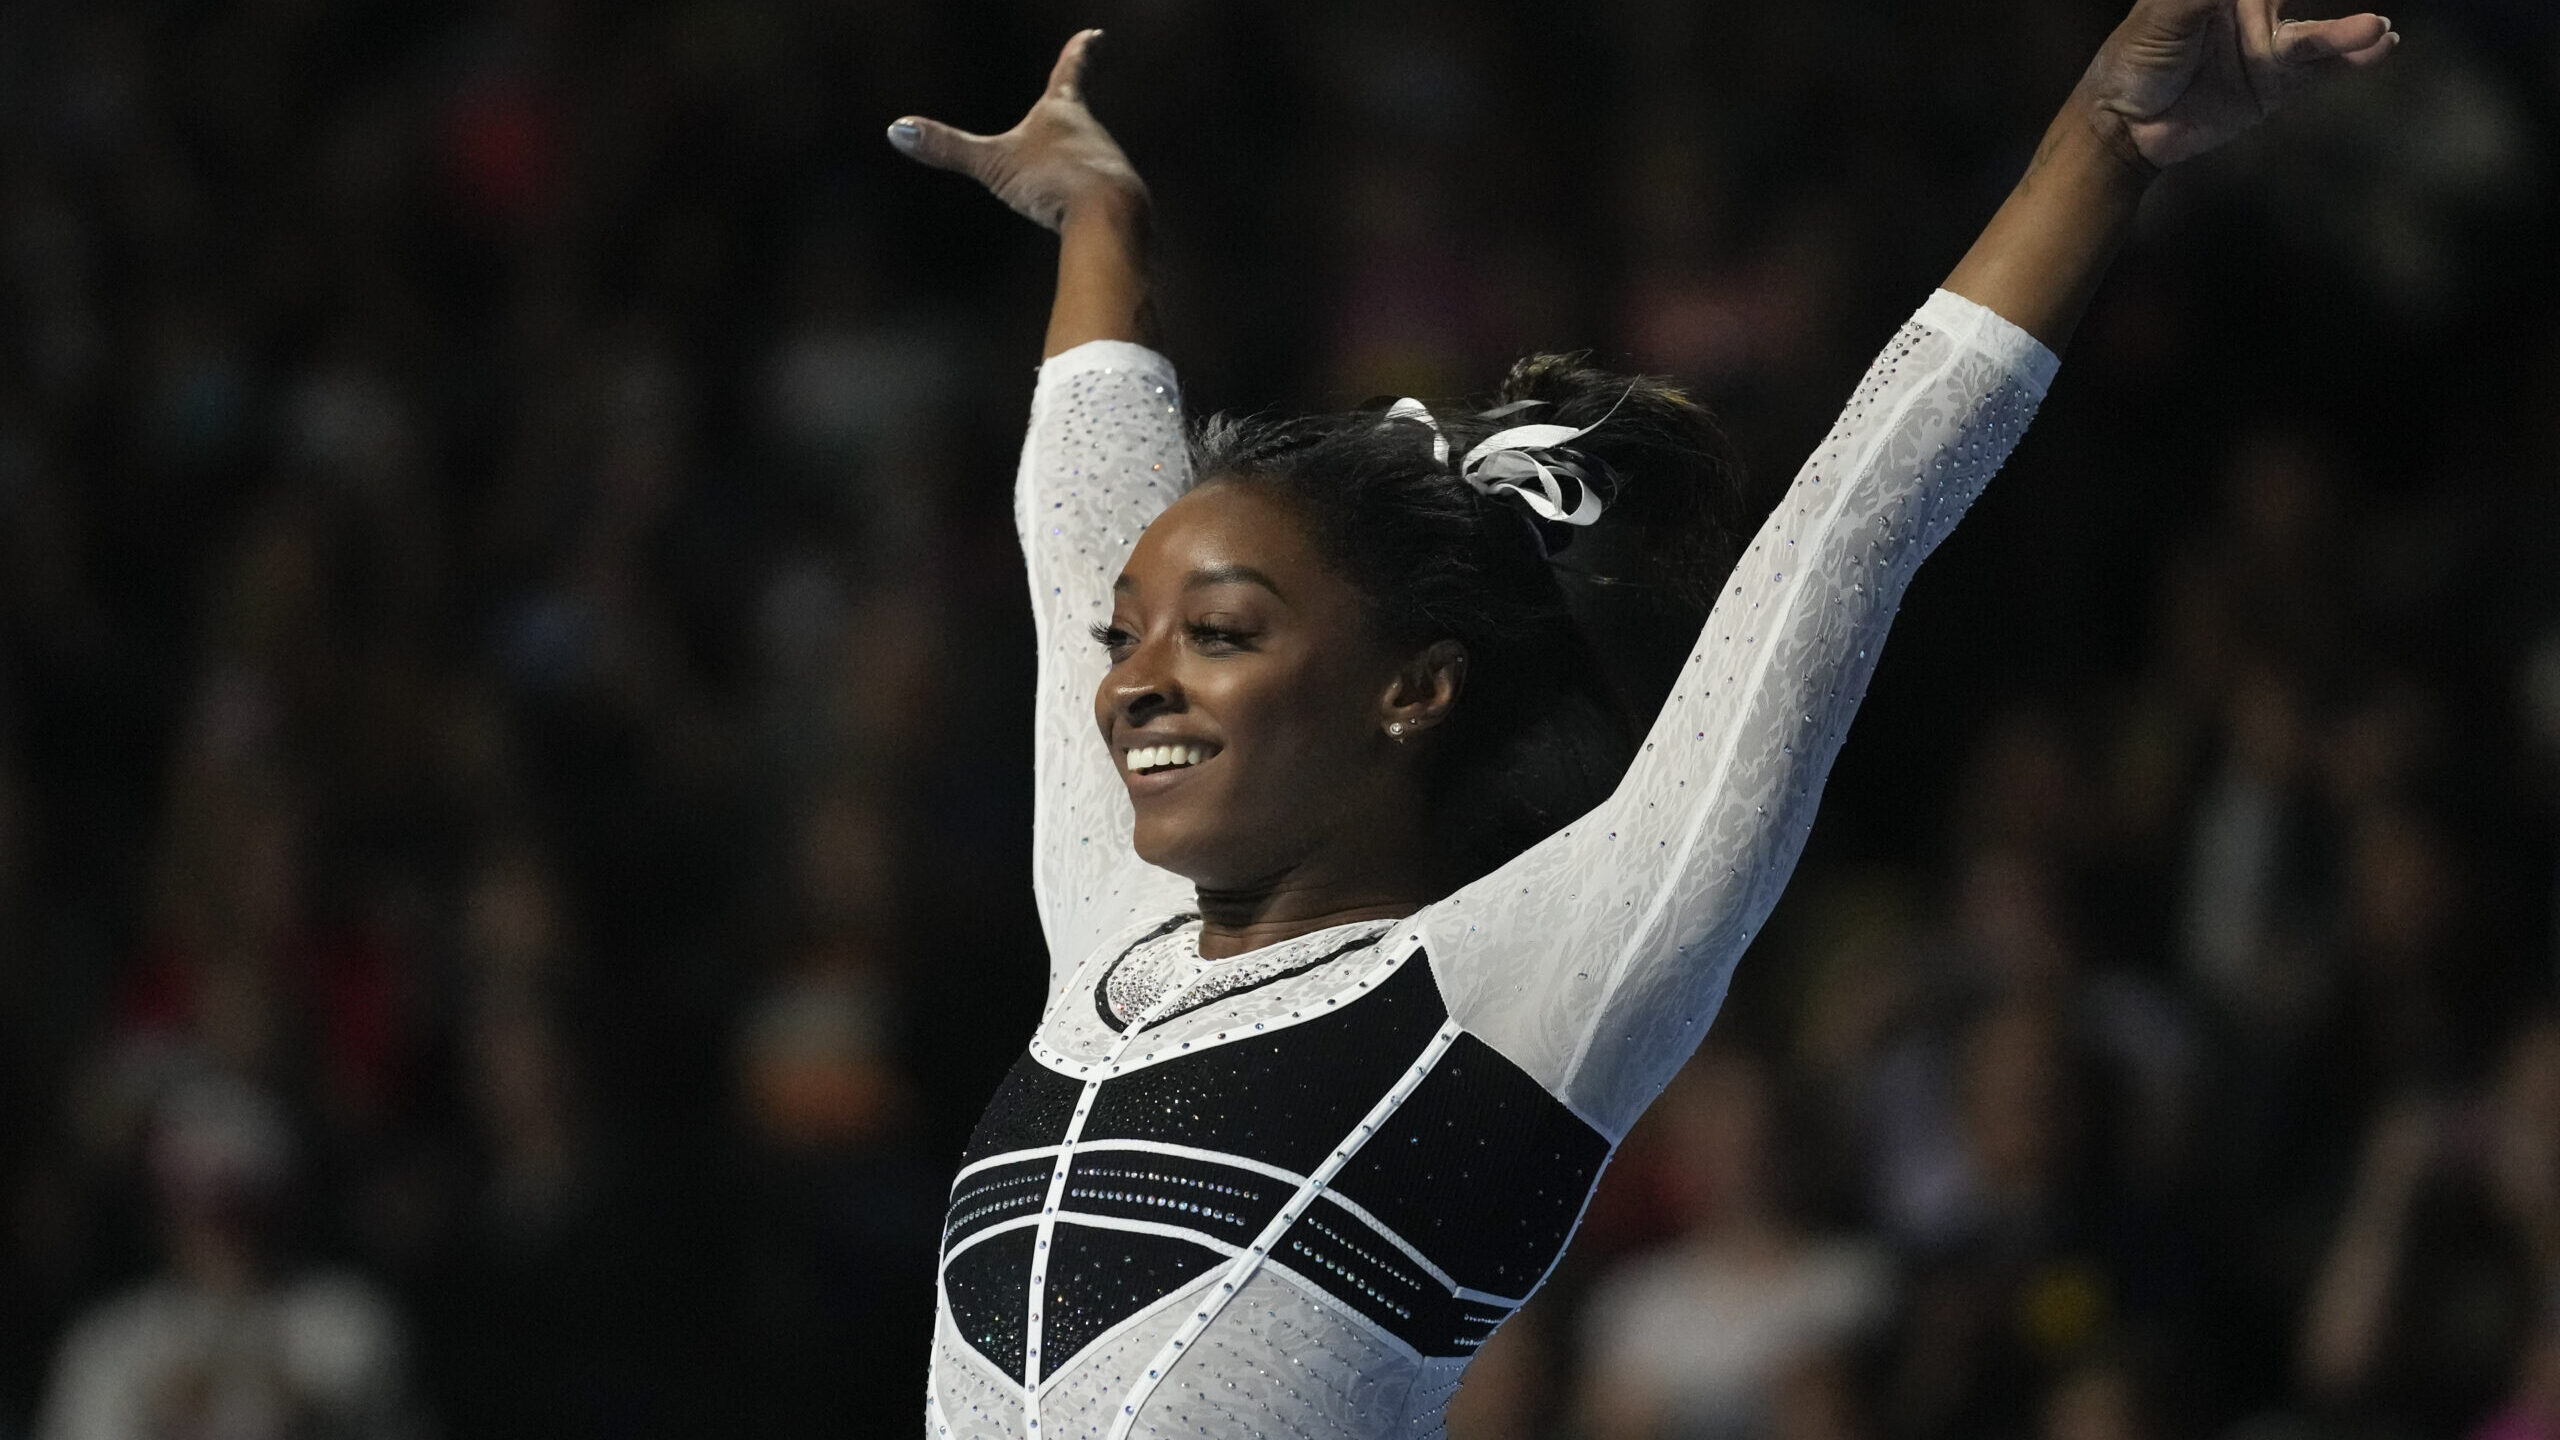 HOFFMAN ESTATES, Ill. (AP) — Simone Biles spent two years trying to distance herself from those s...